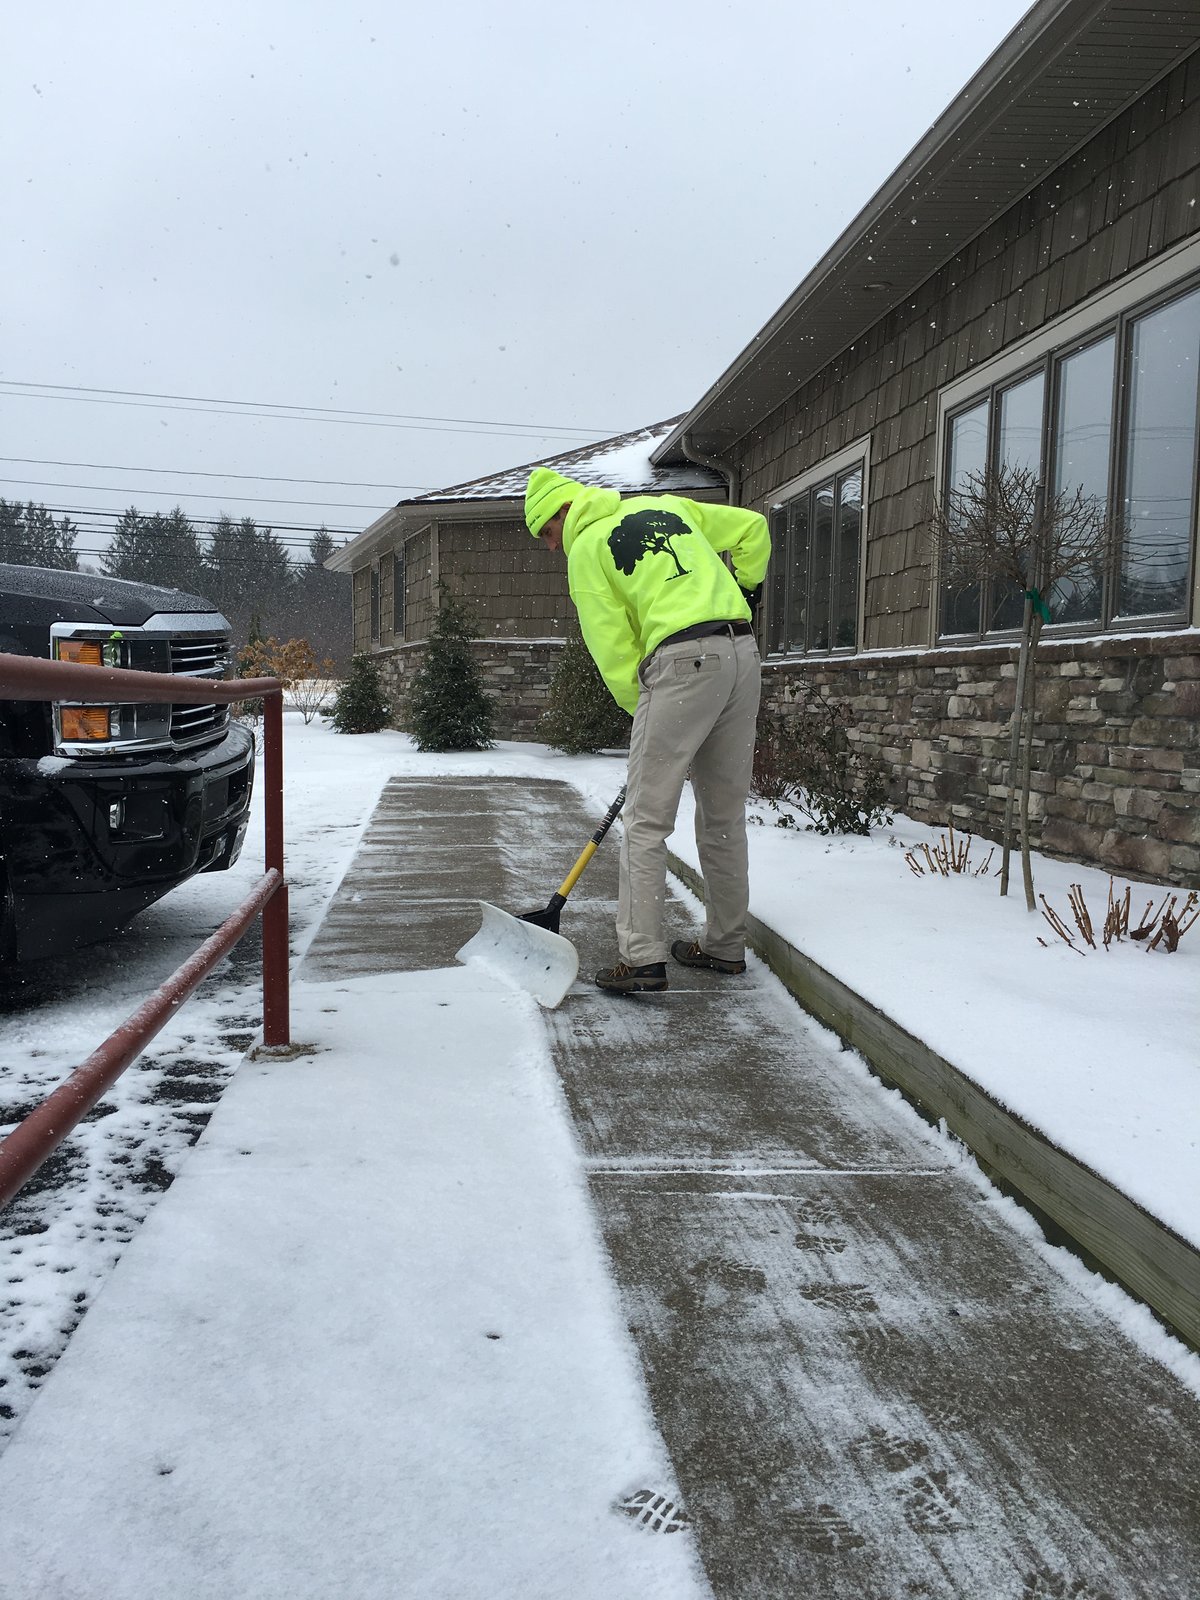 commercial snow removal company shoveling snow off sidewalks